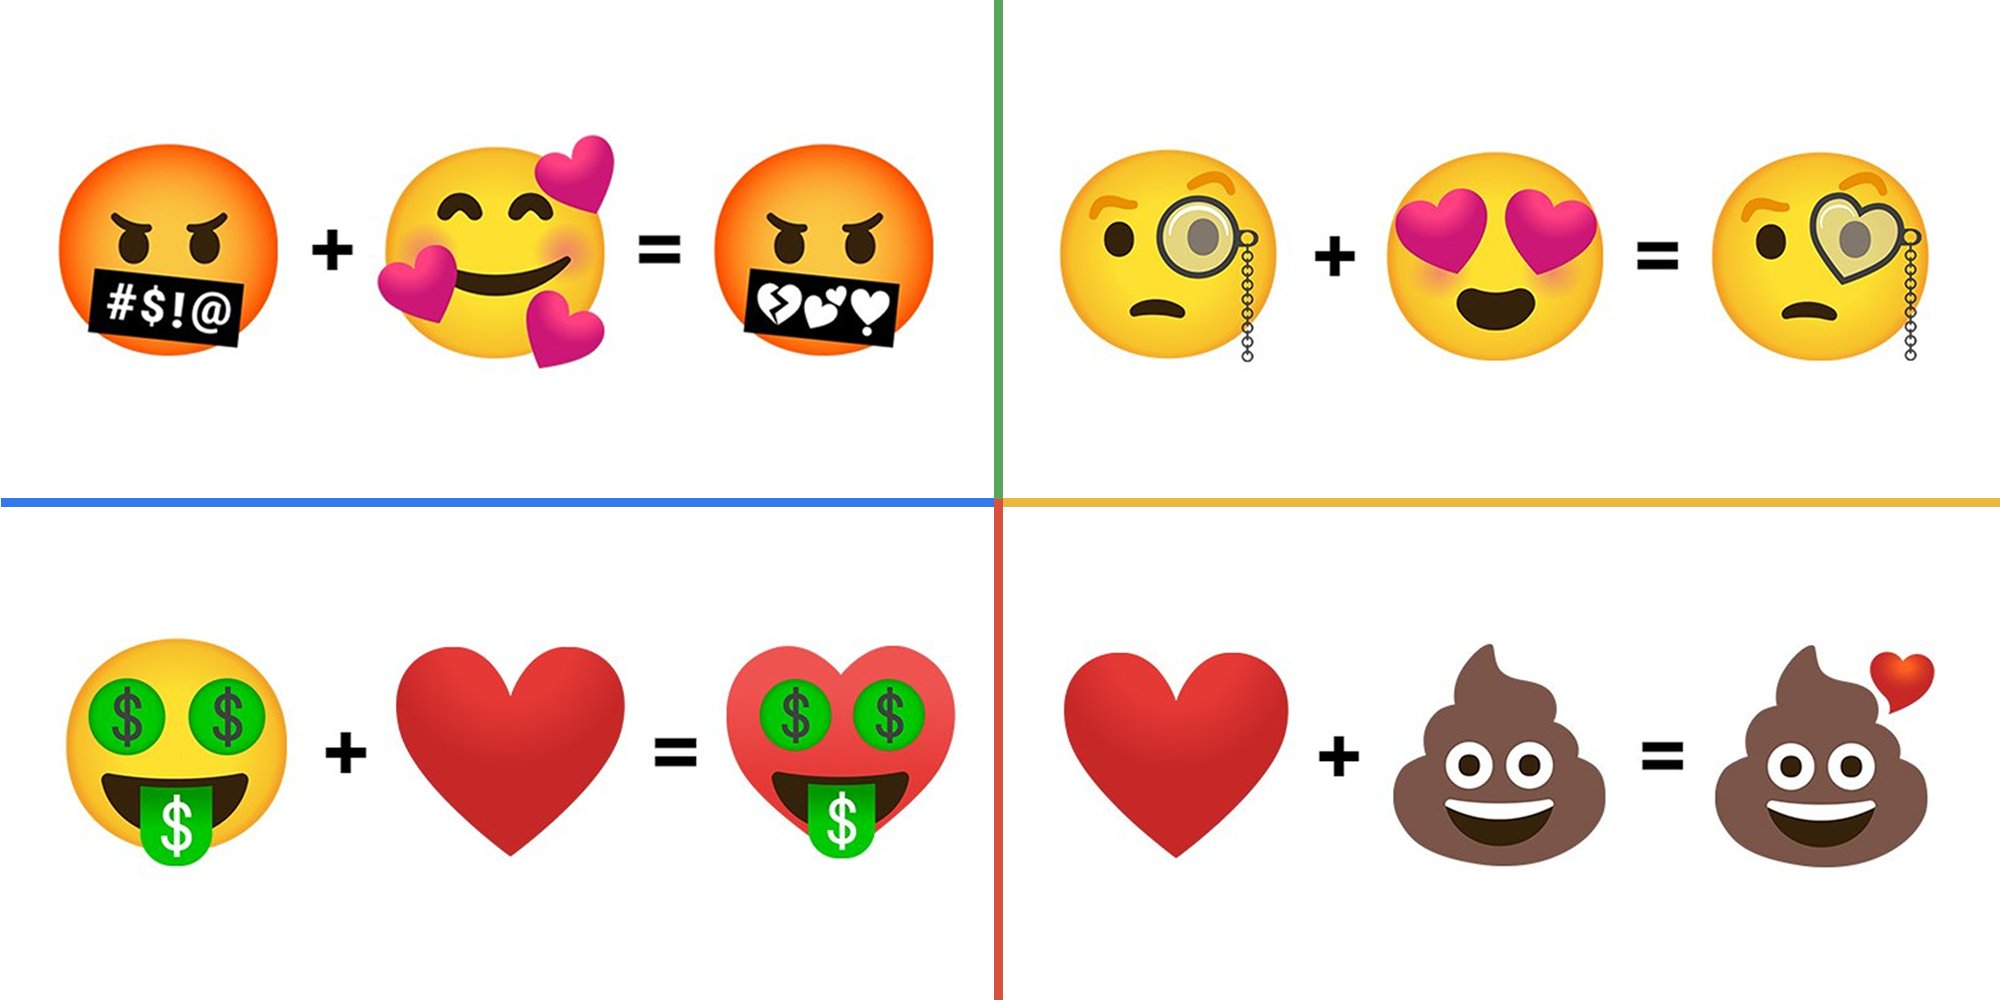 Android's Google Emoji Kitchen has given us the most cursed emojis of all.